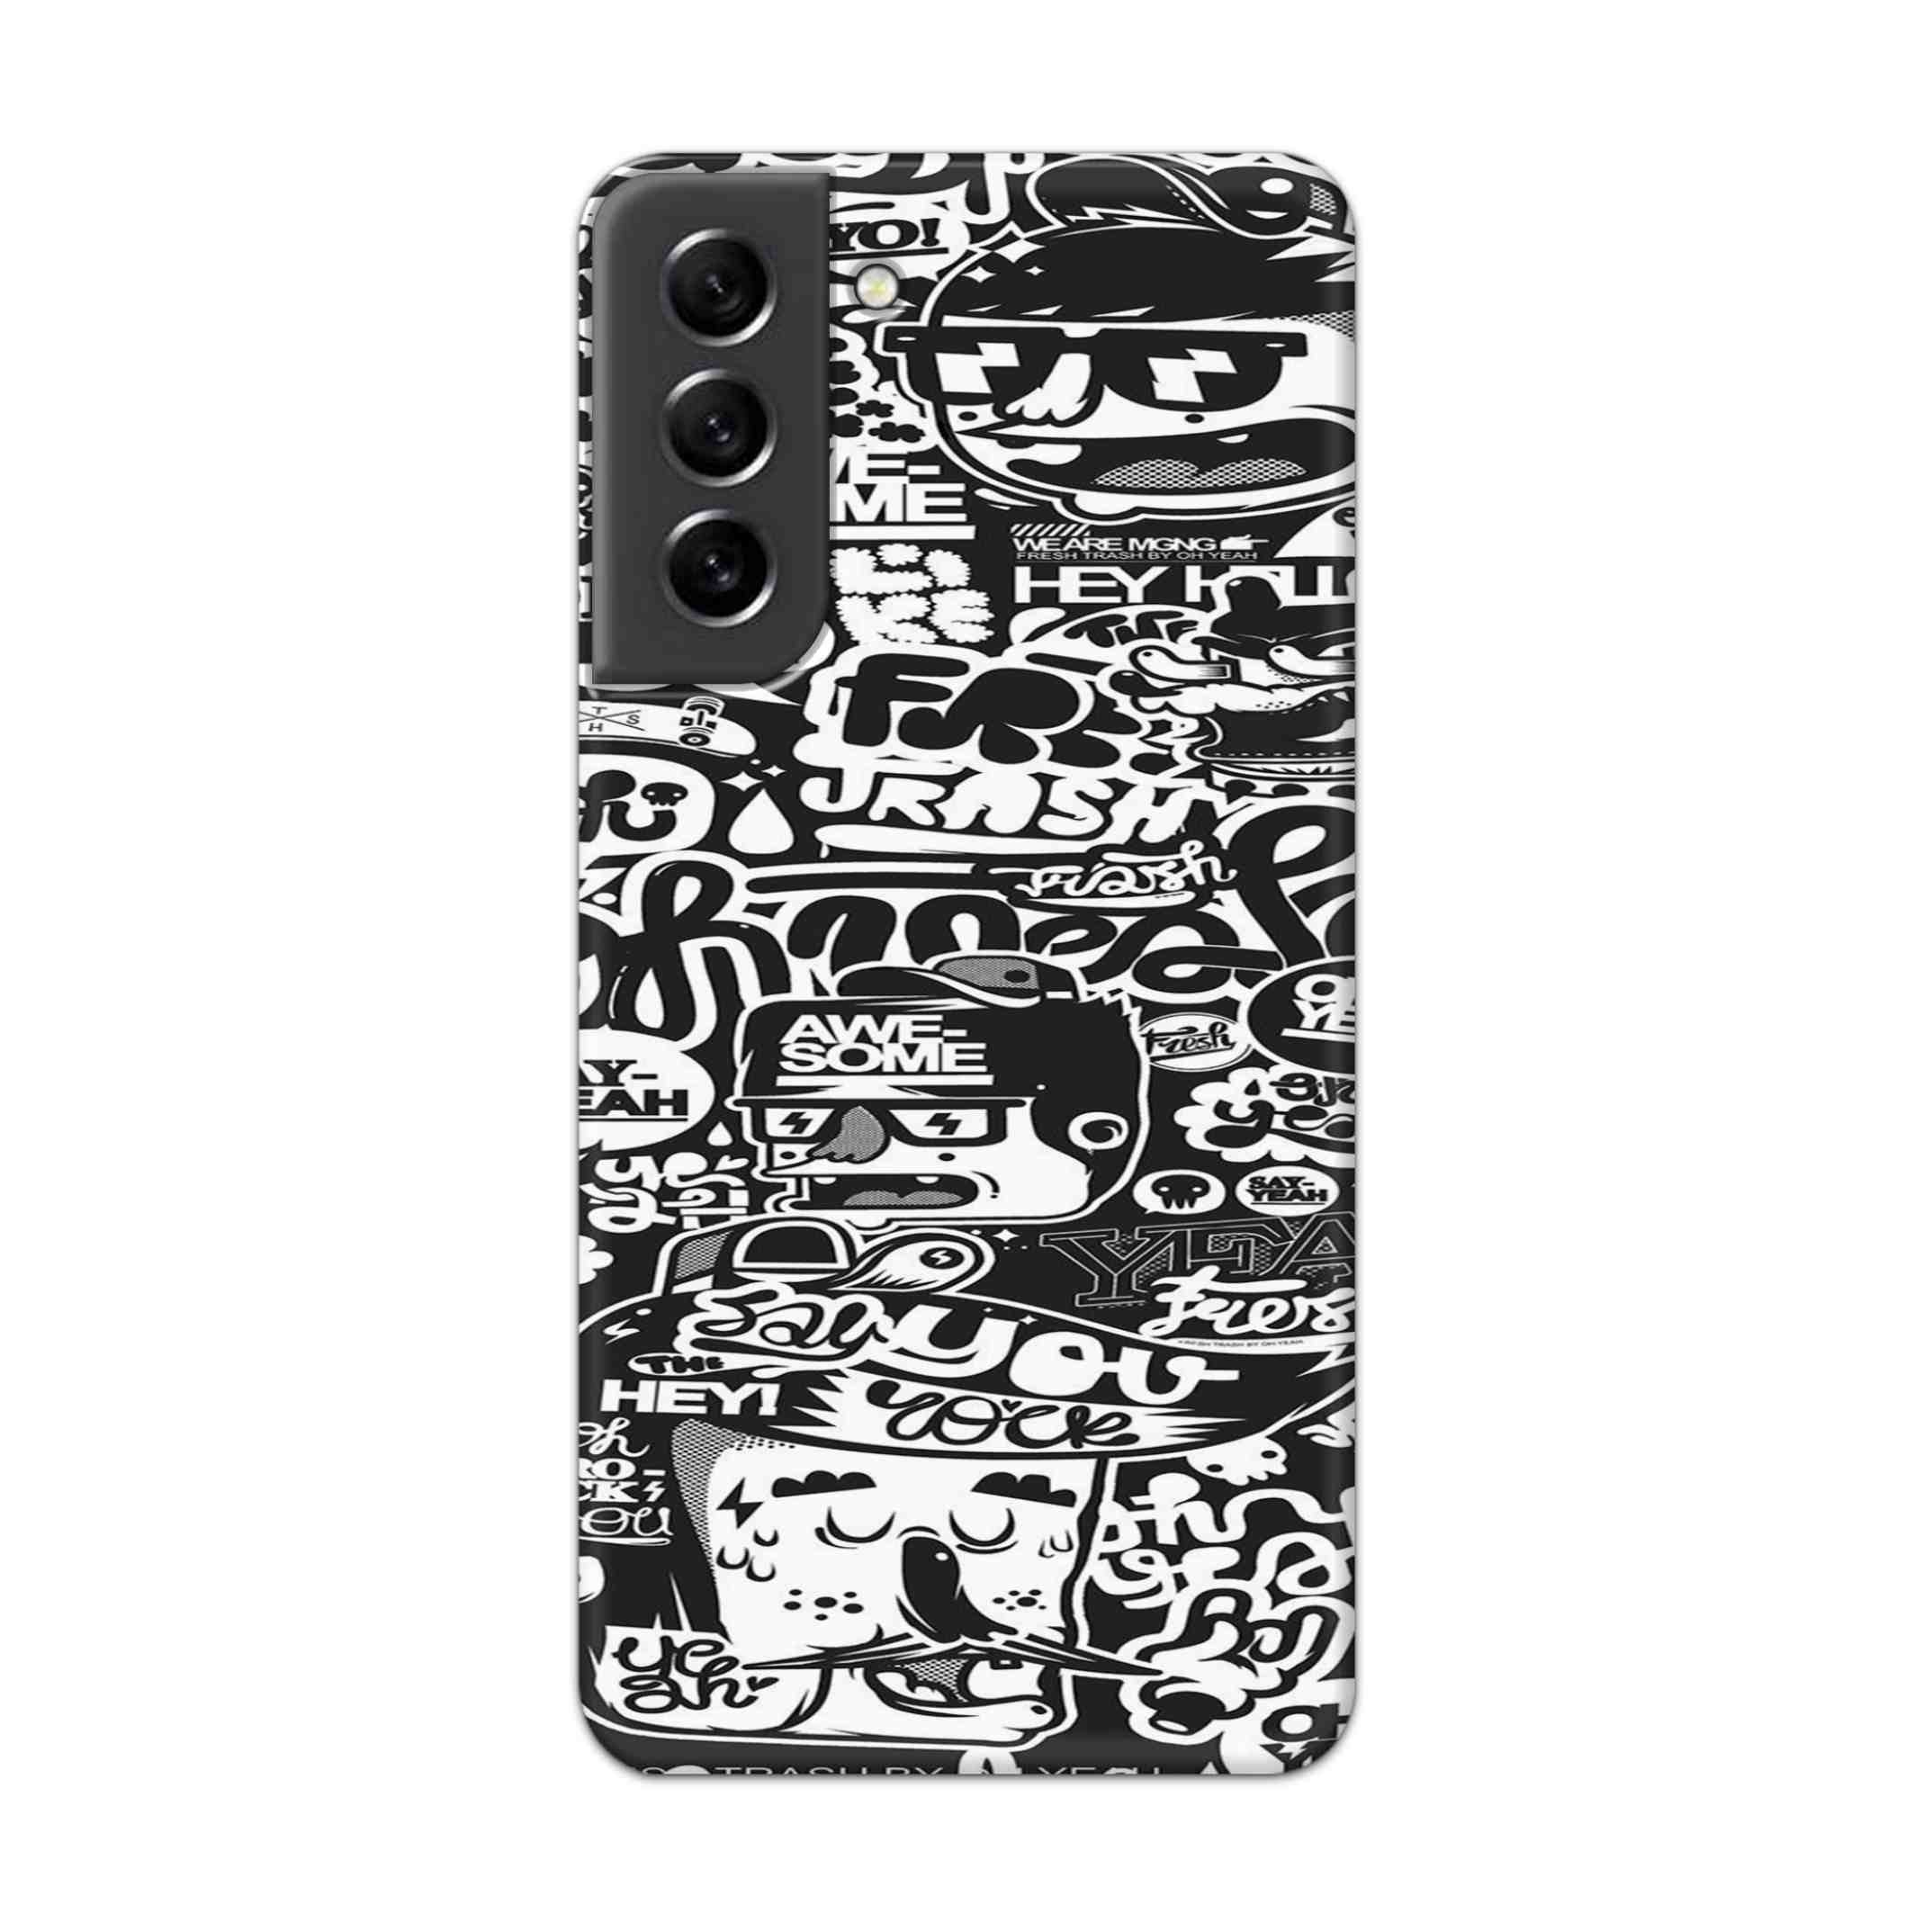 Buy Awesome Hard Back Mobile Phone Case Cover For Samsung S21 FE Online